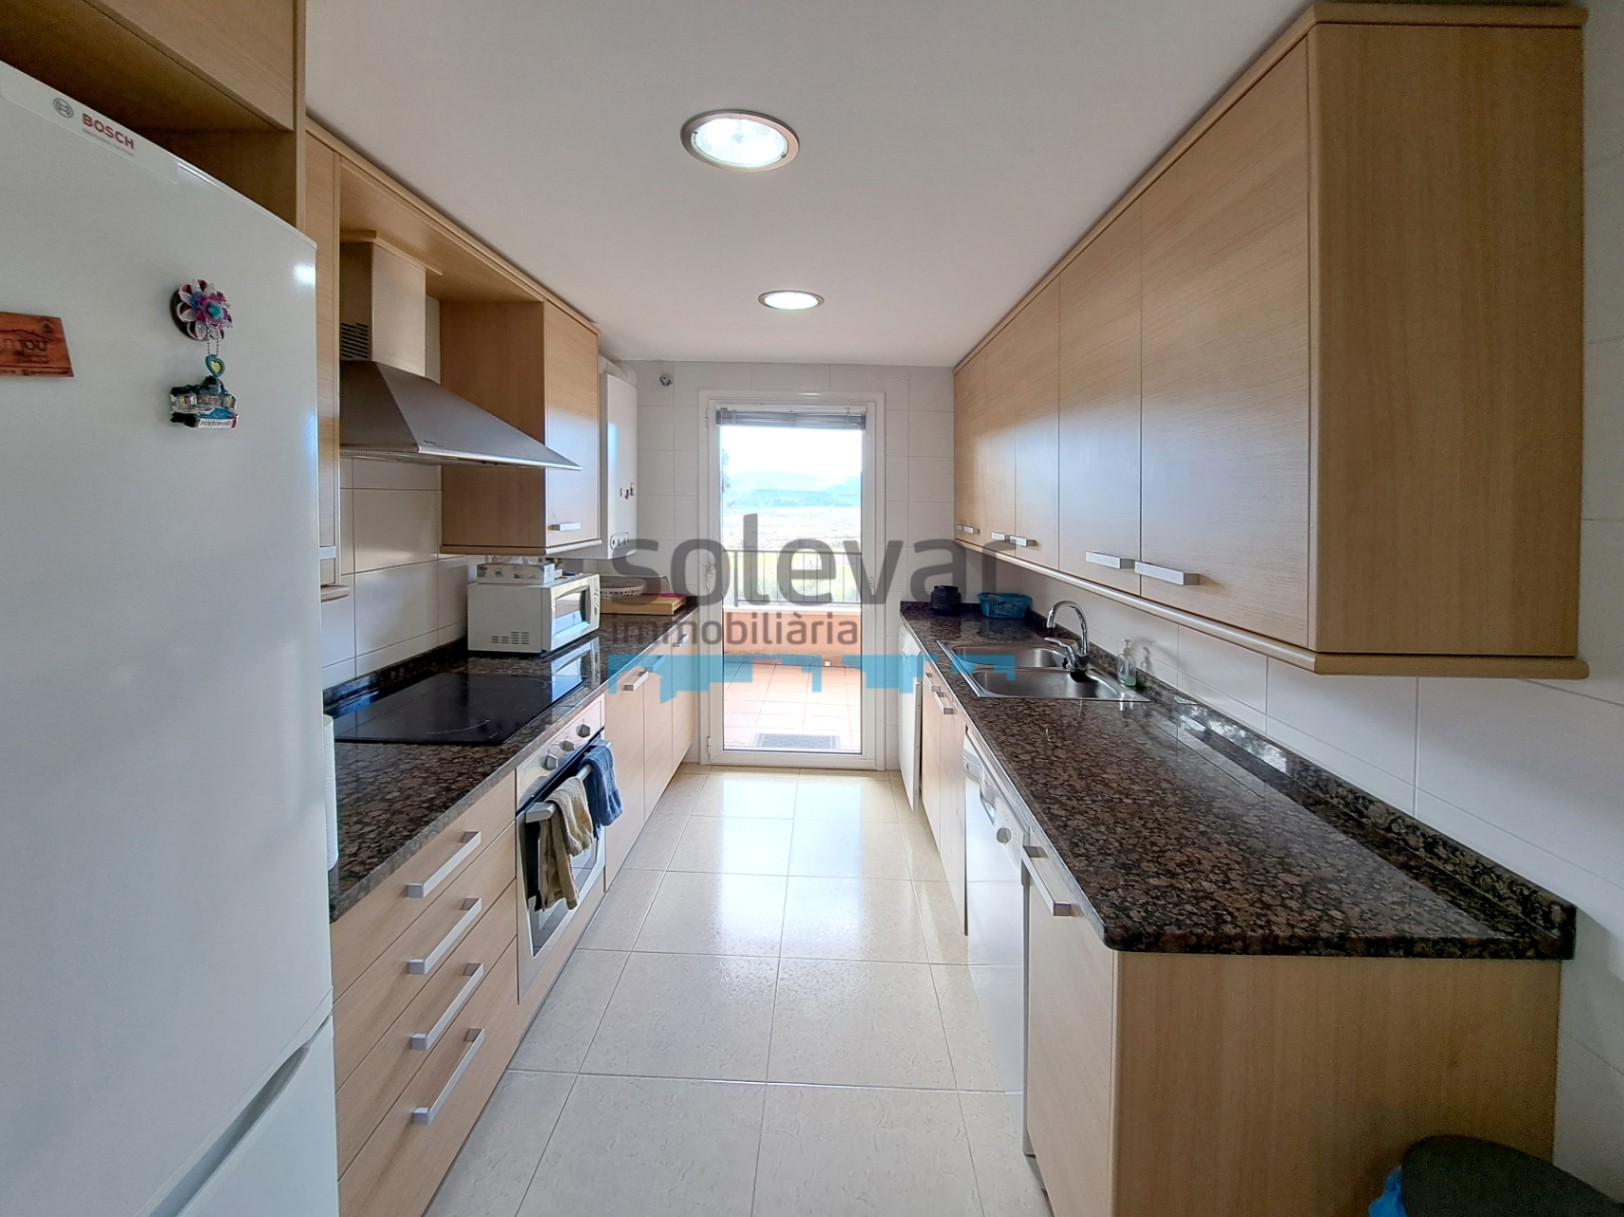 FLAT WITH SPECTACULAR VIEWS IN TALARN